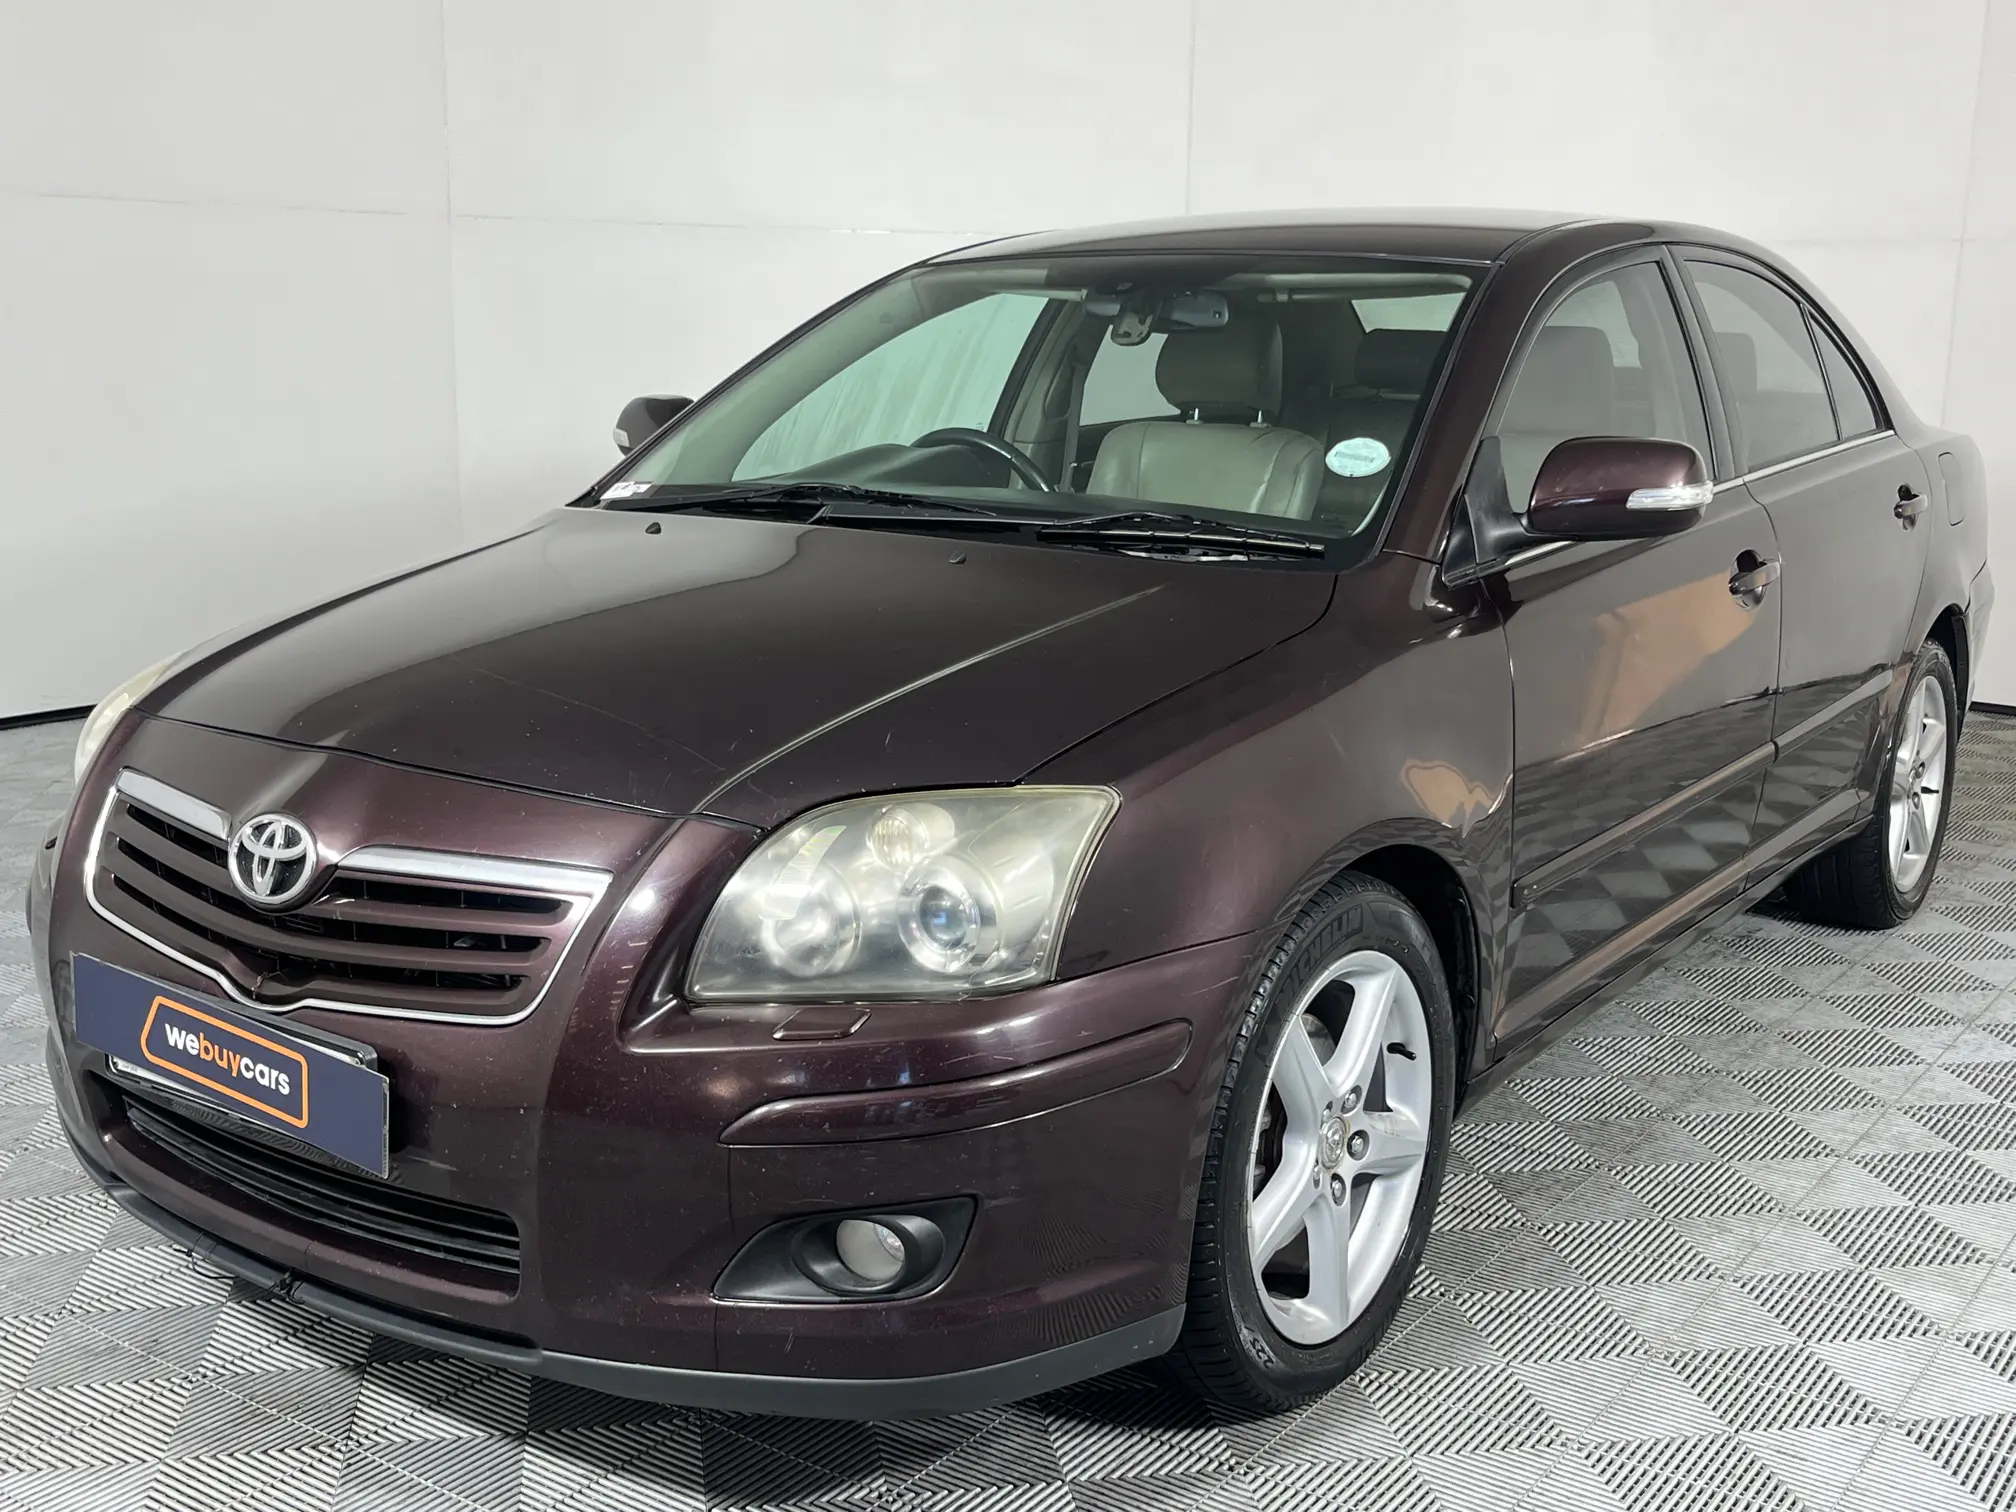 2007 Toyota Avensis 2.2 D-4d Exclusive